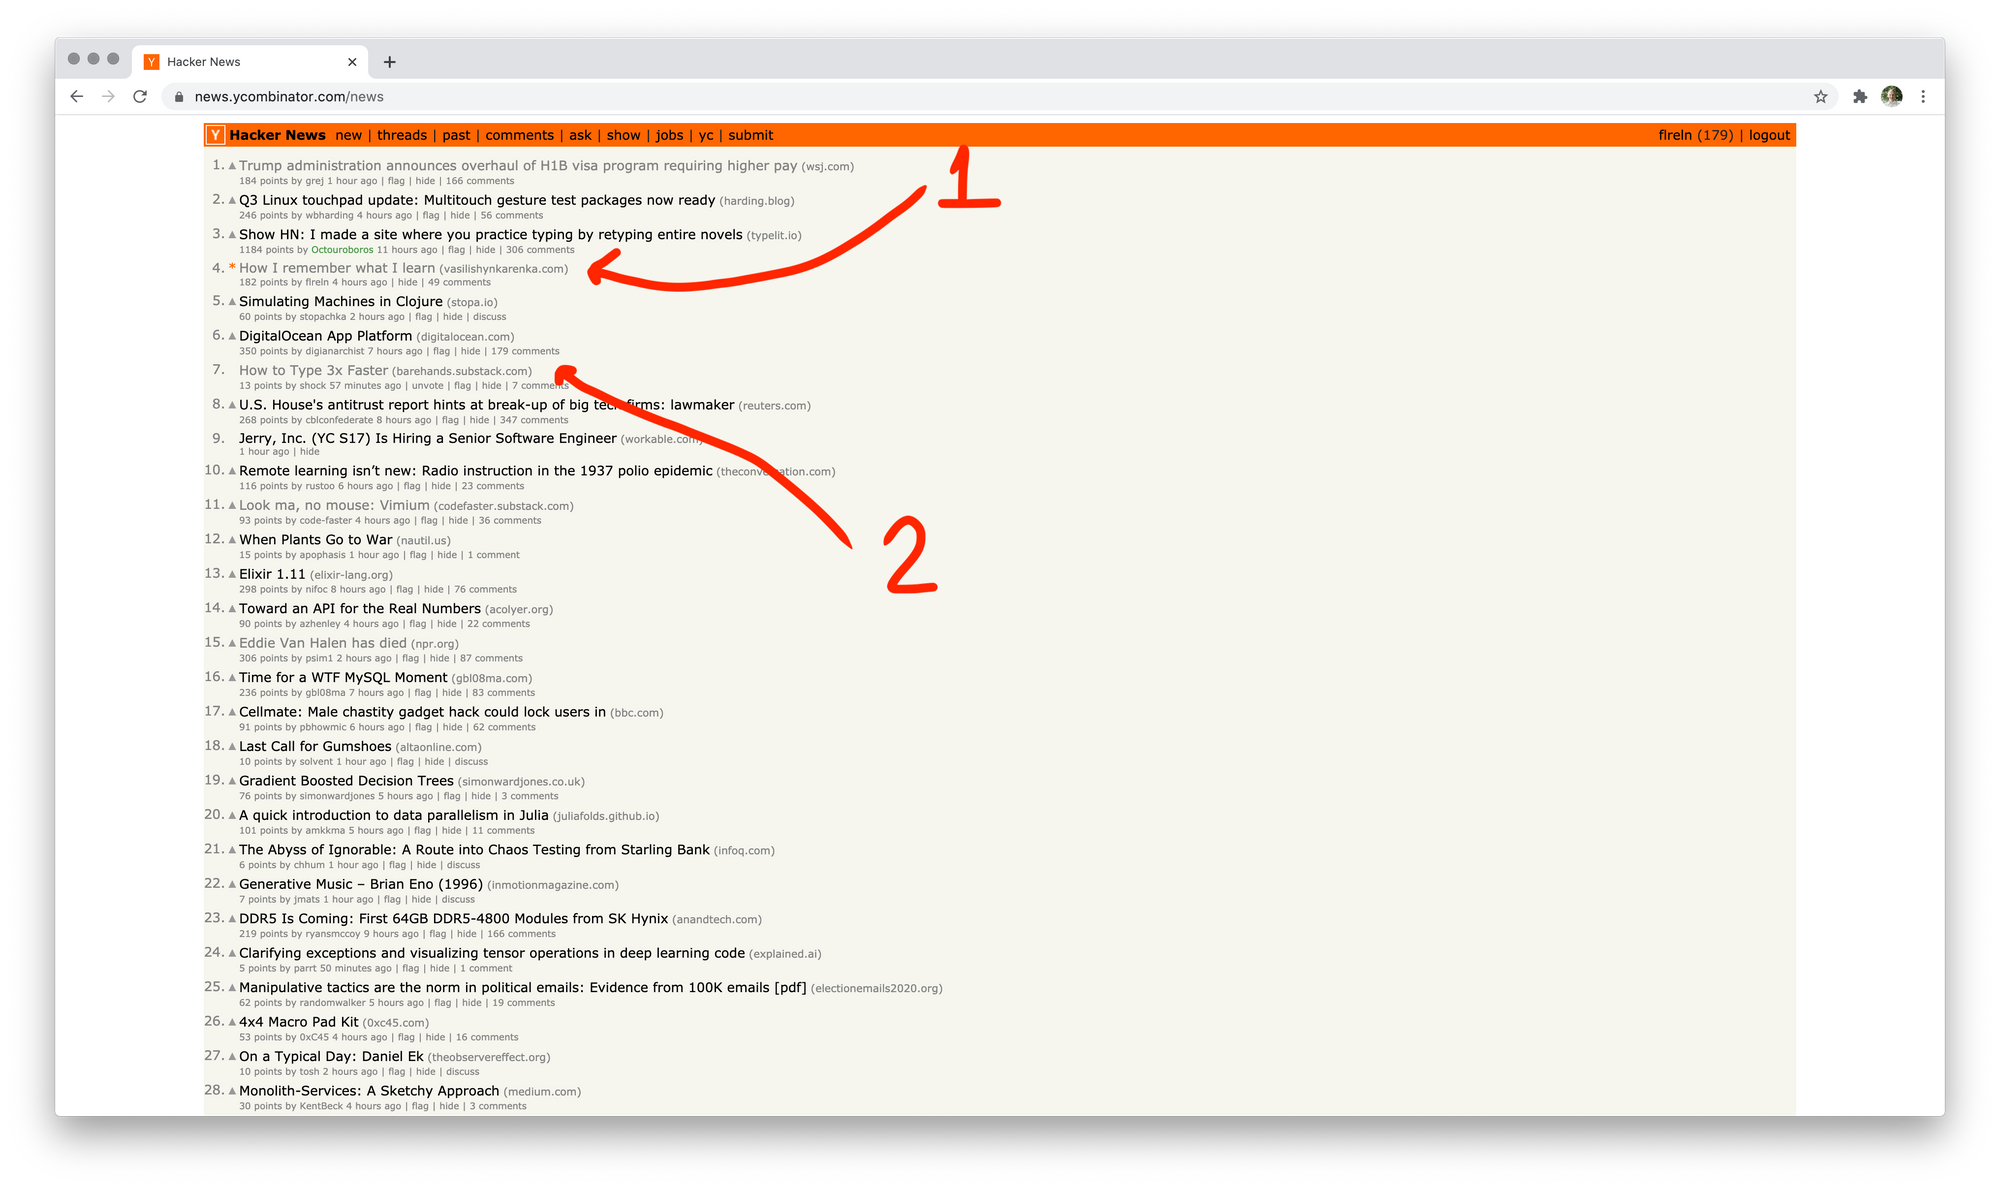 Hacking Hacker News frontpage with GPT-3